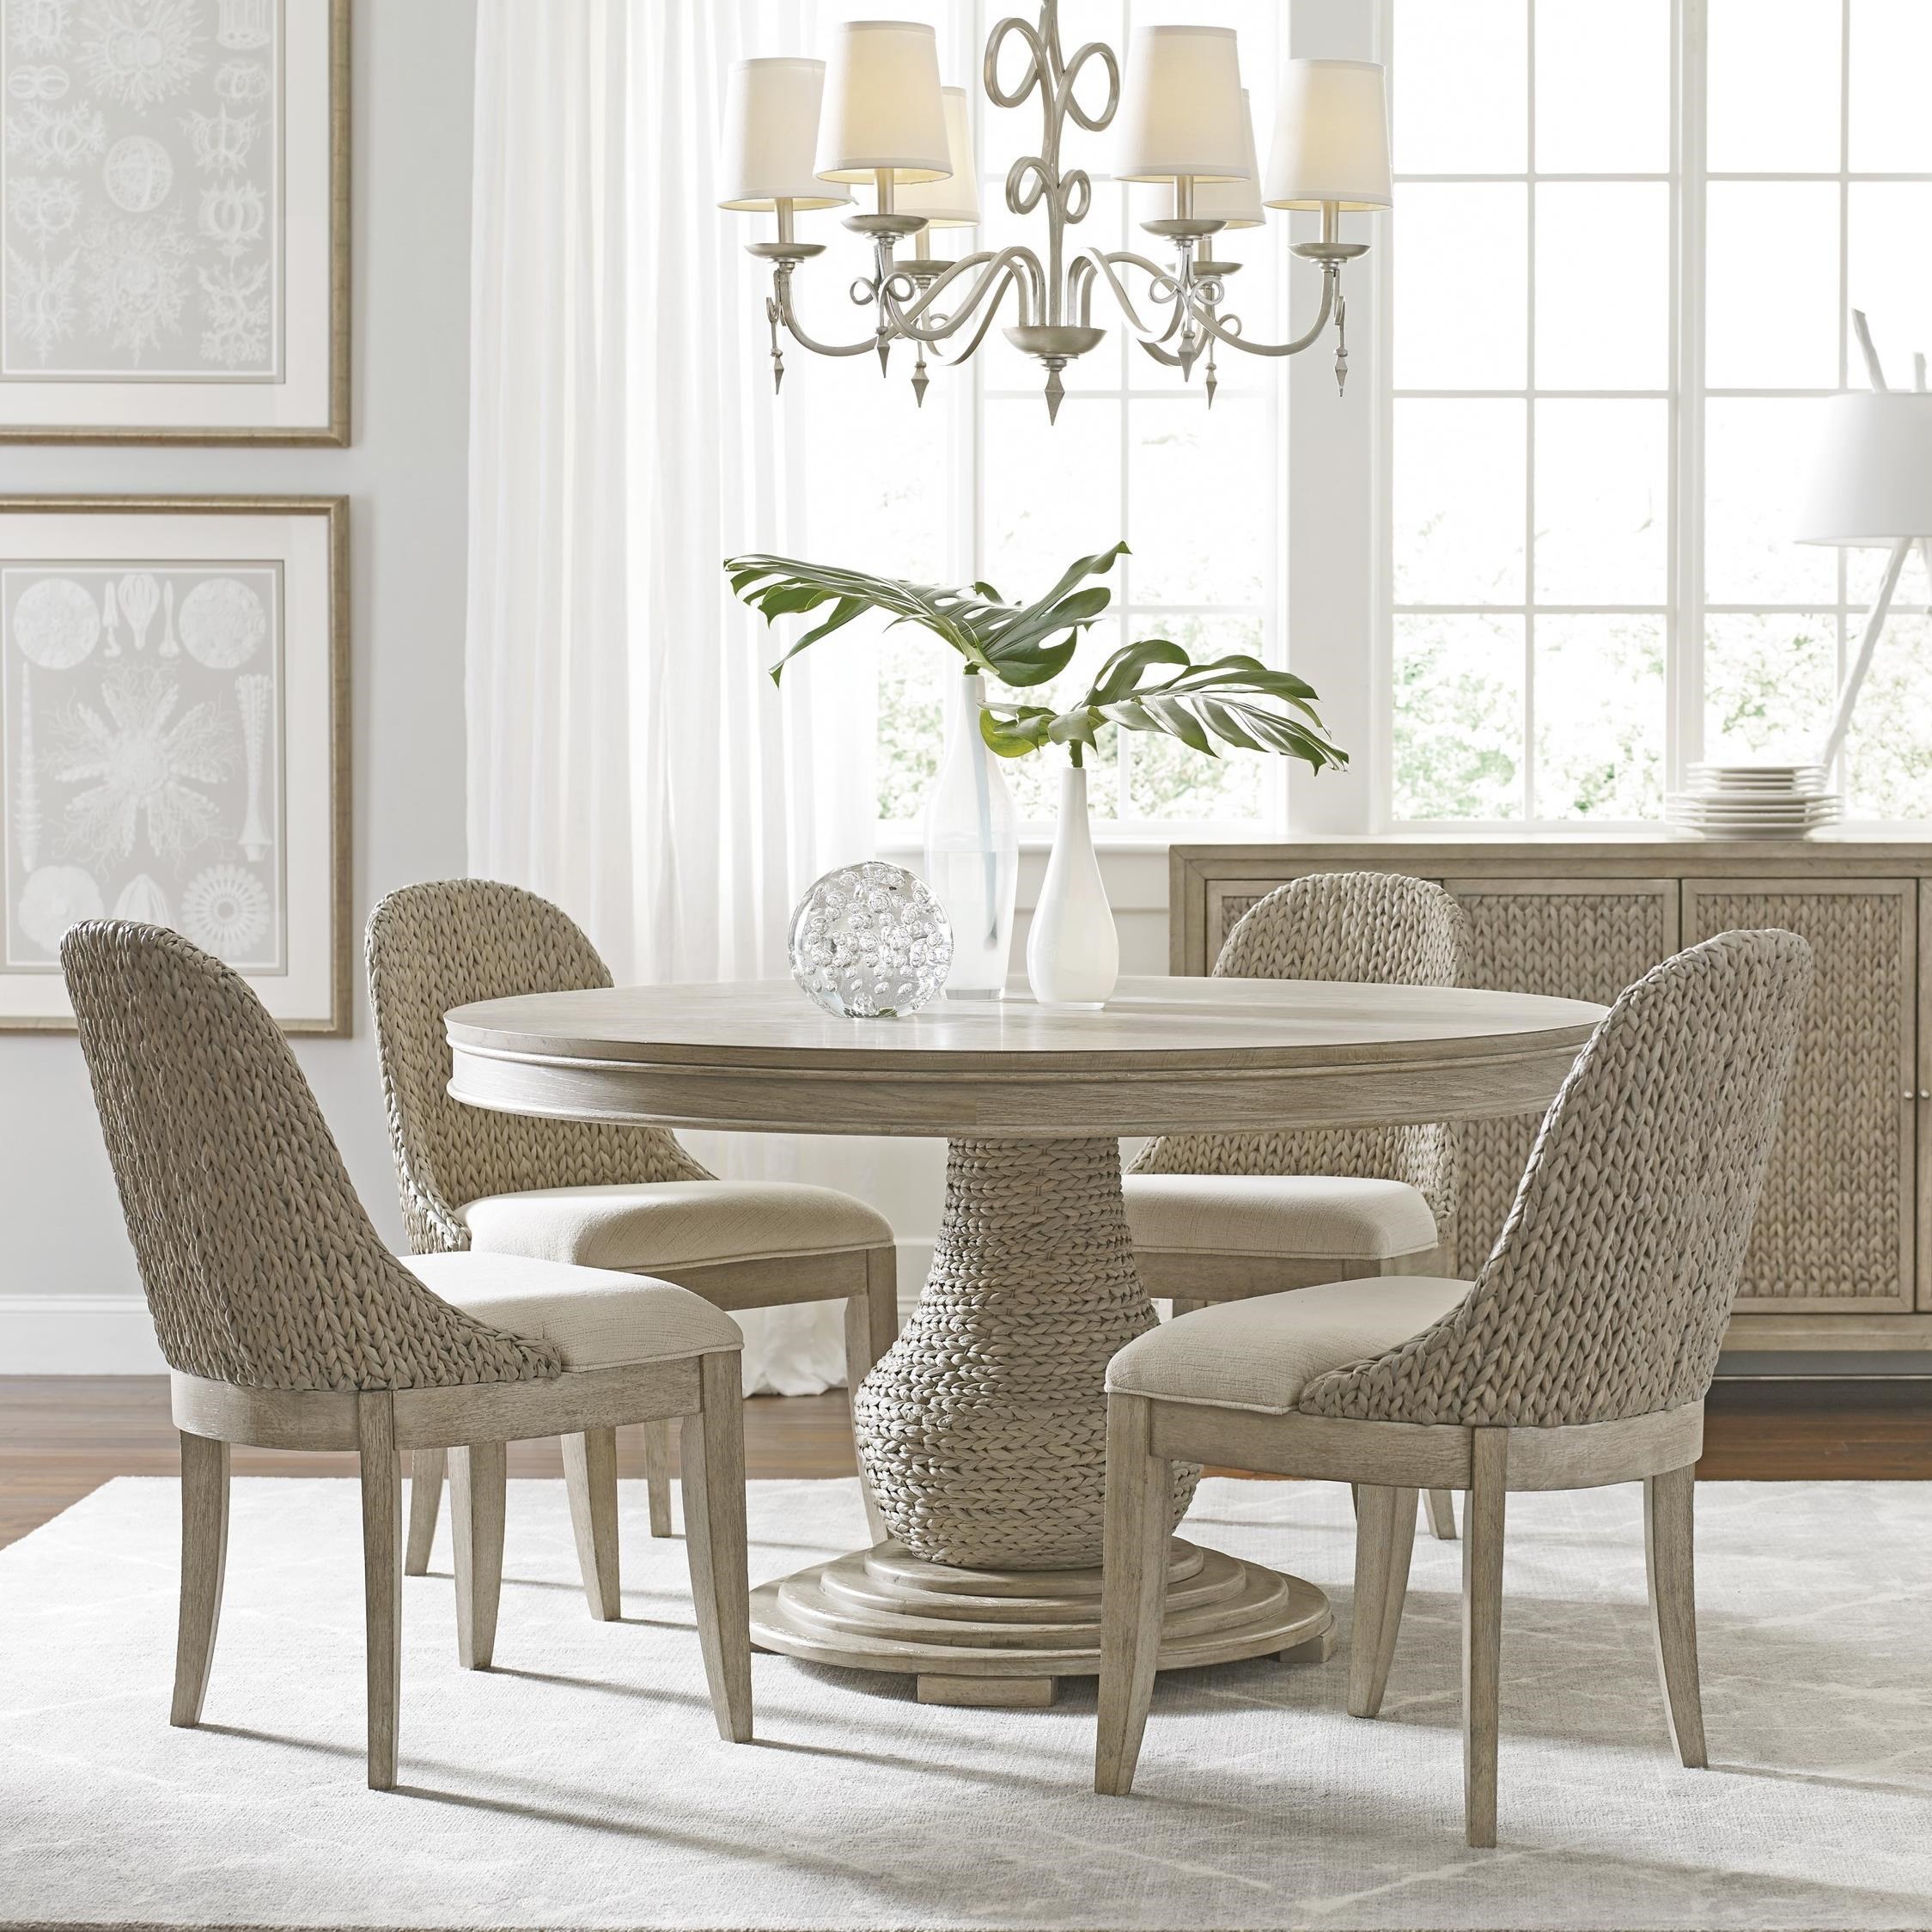 Relaxed Vintage 5 Piece Dining Set with Woven Detail